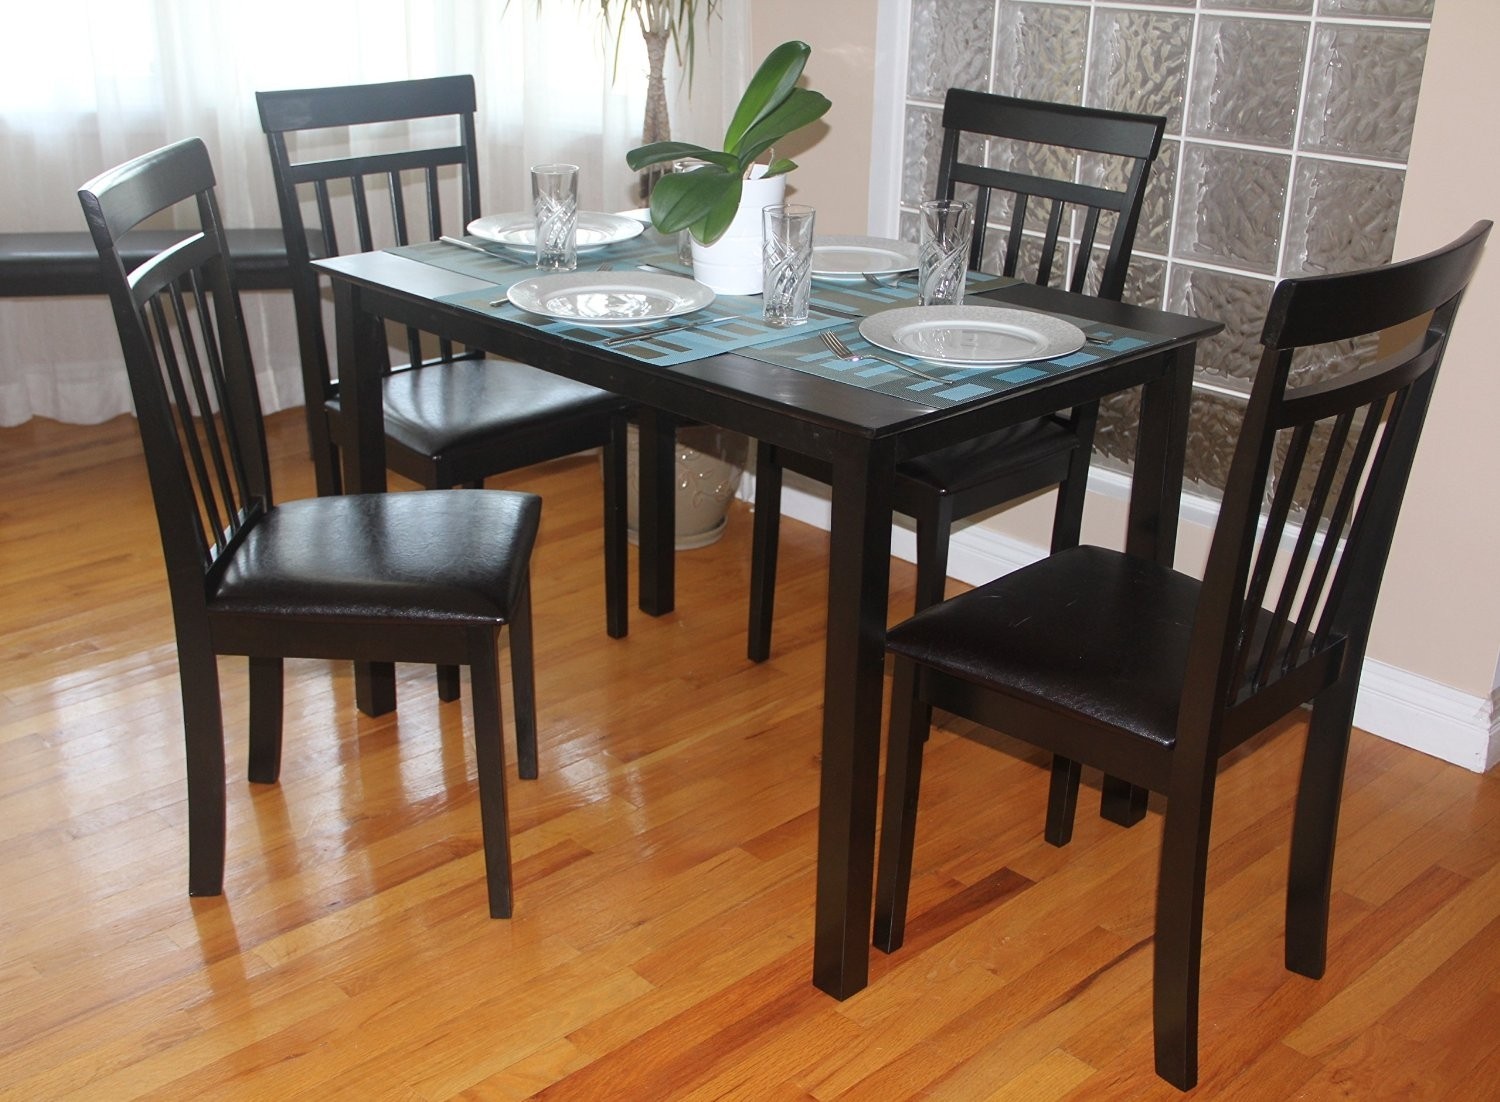 Set of 4 Warm Dining Room Kitchen Solid Wood Hardwood Chairs in Espresso Black Finish